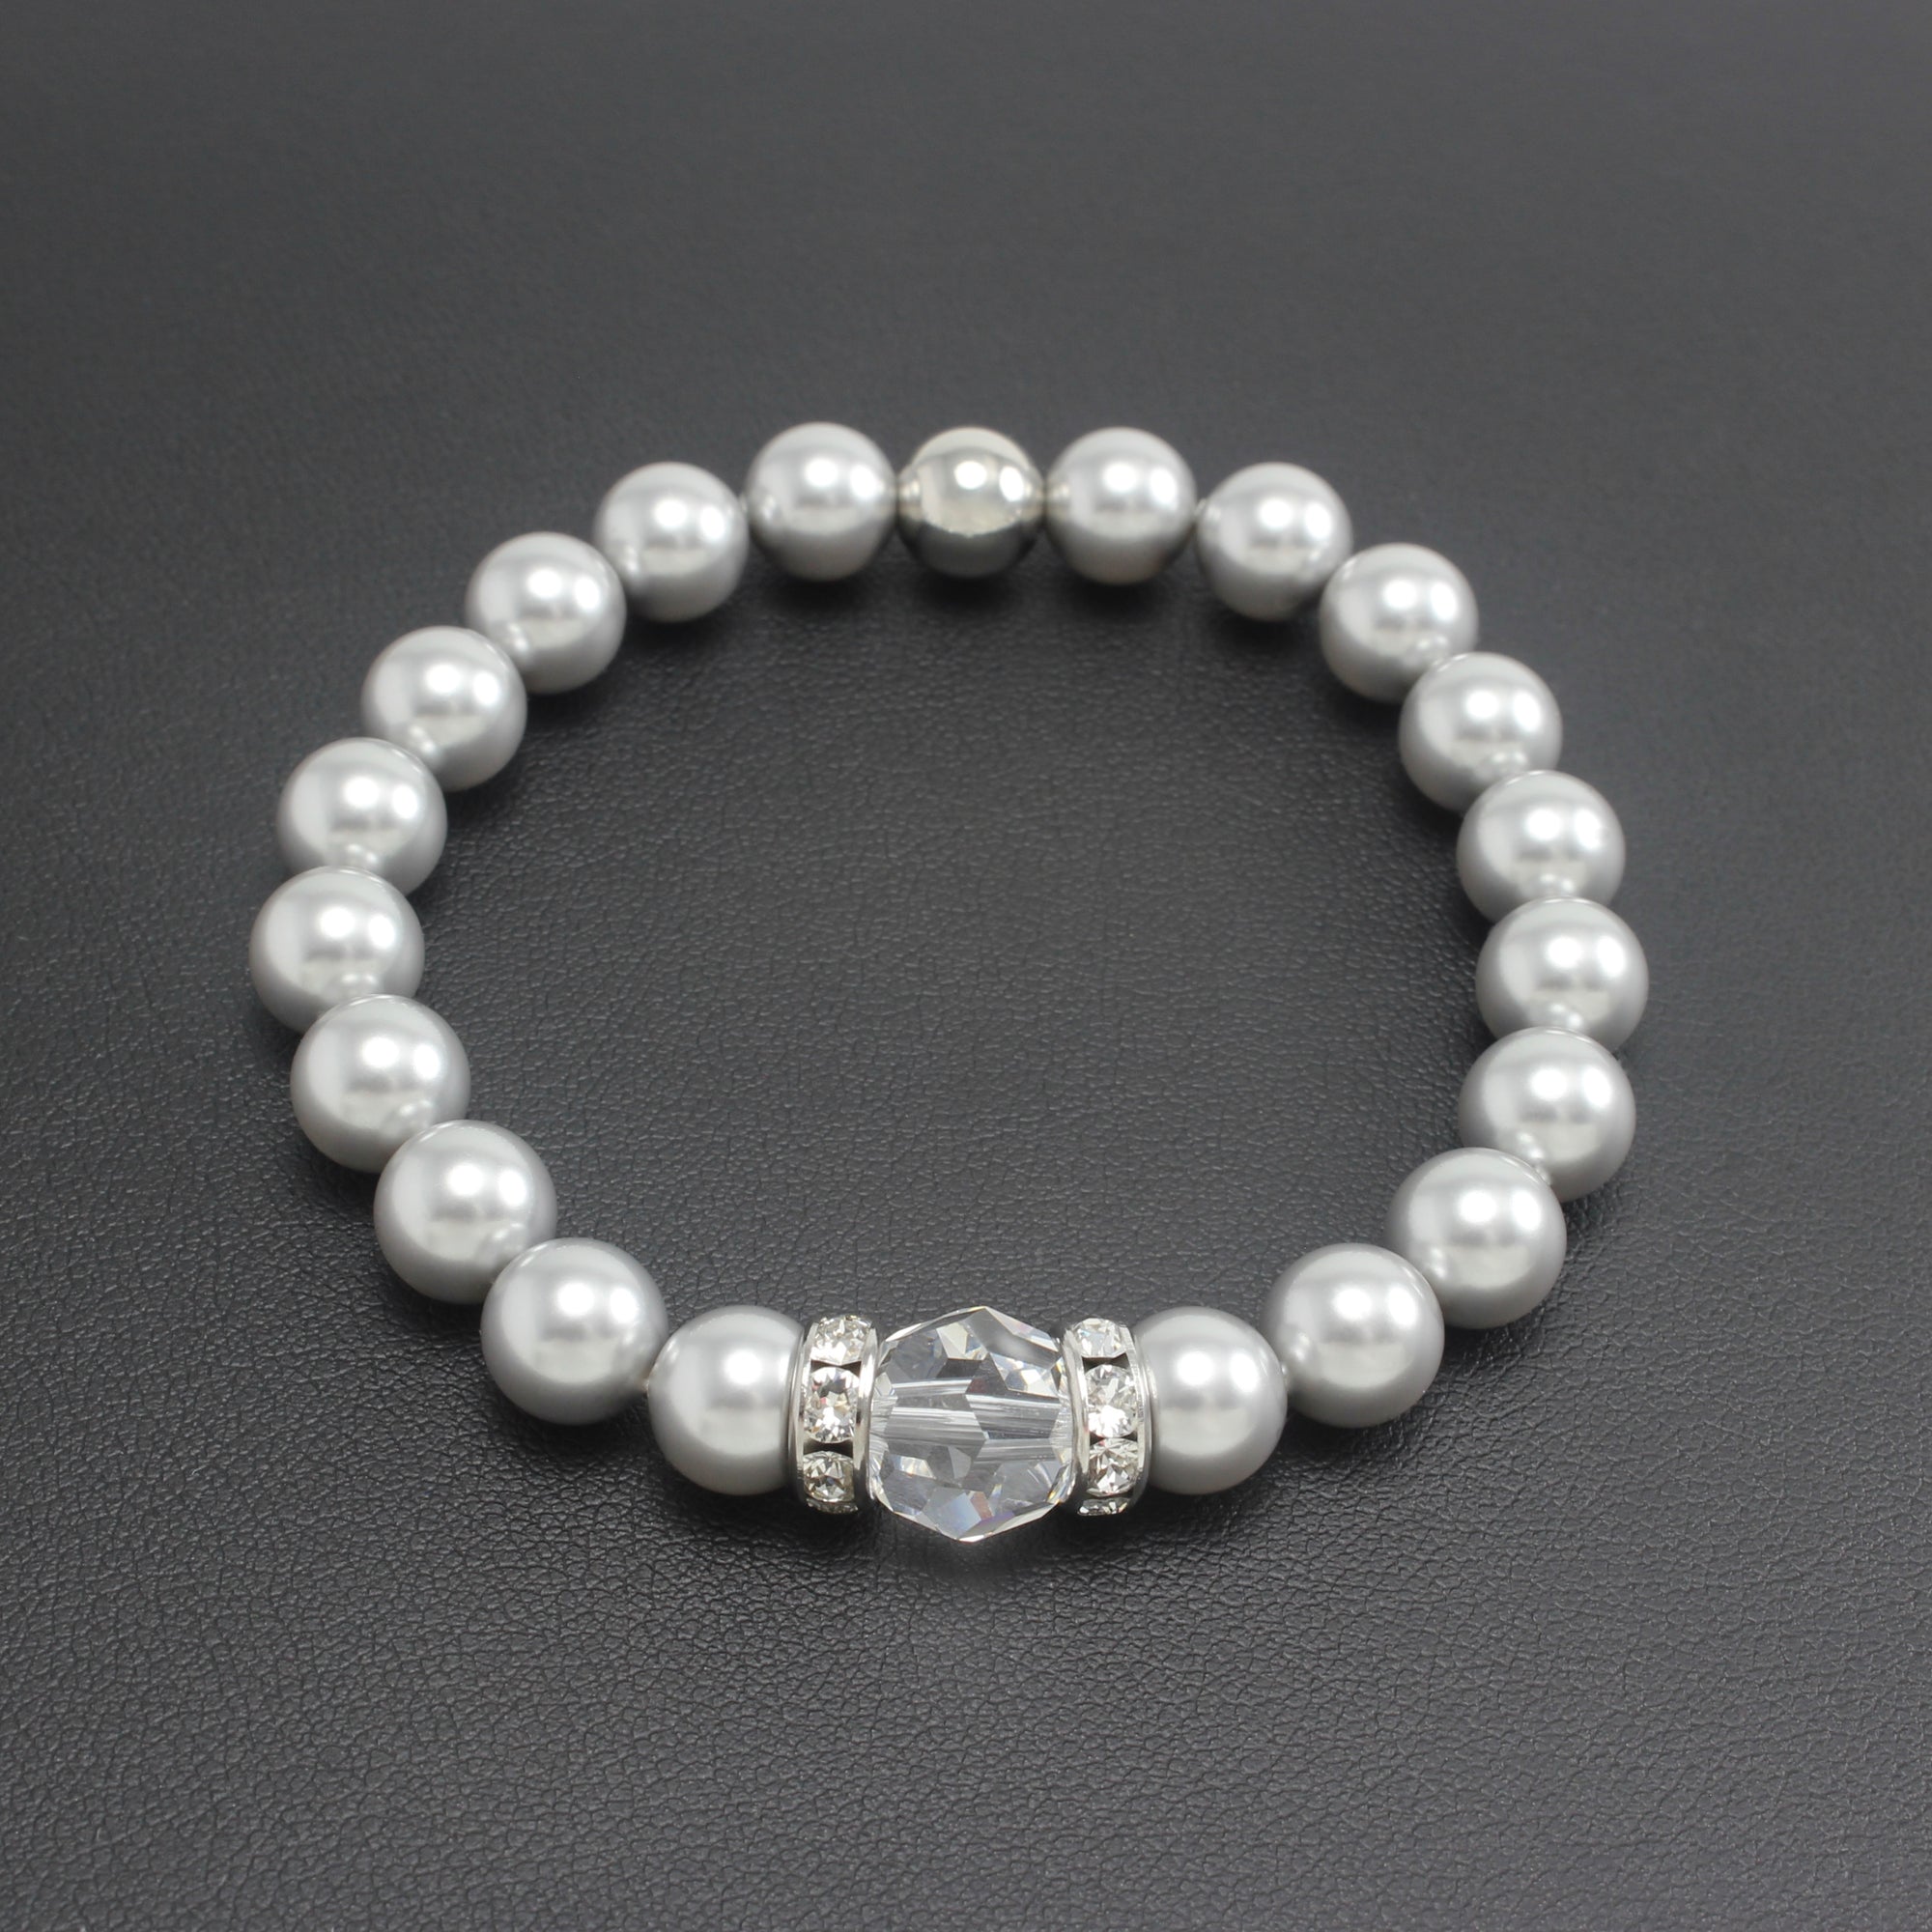 Classical Luxe Crystal Pearl Stretch Bracelet (Silver)